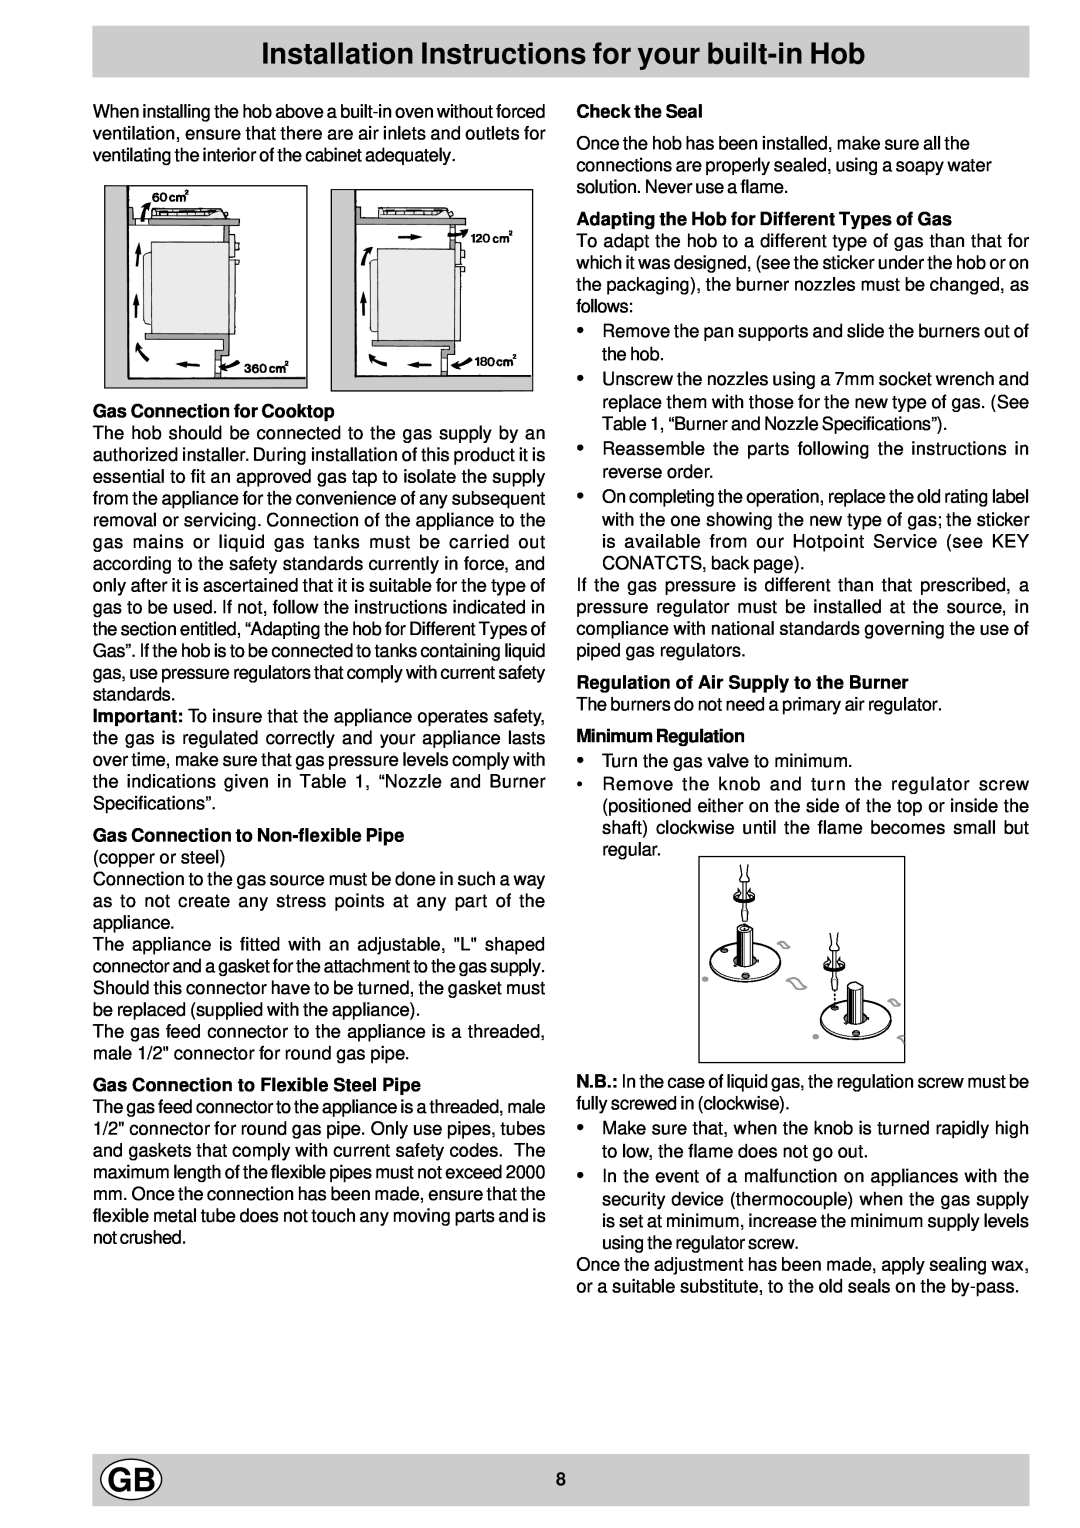 Hotpoint GC640 manual Installation Instructions for your built-in Hob, Gas Connection for Cooktop, Check the Seal 